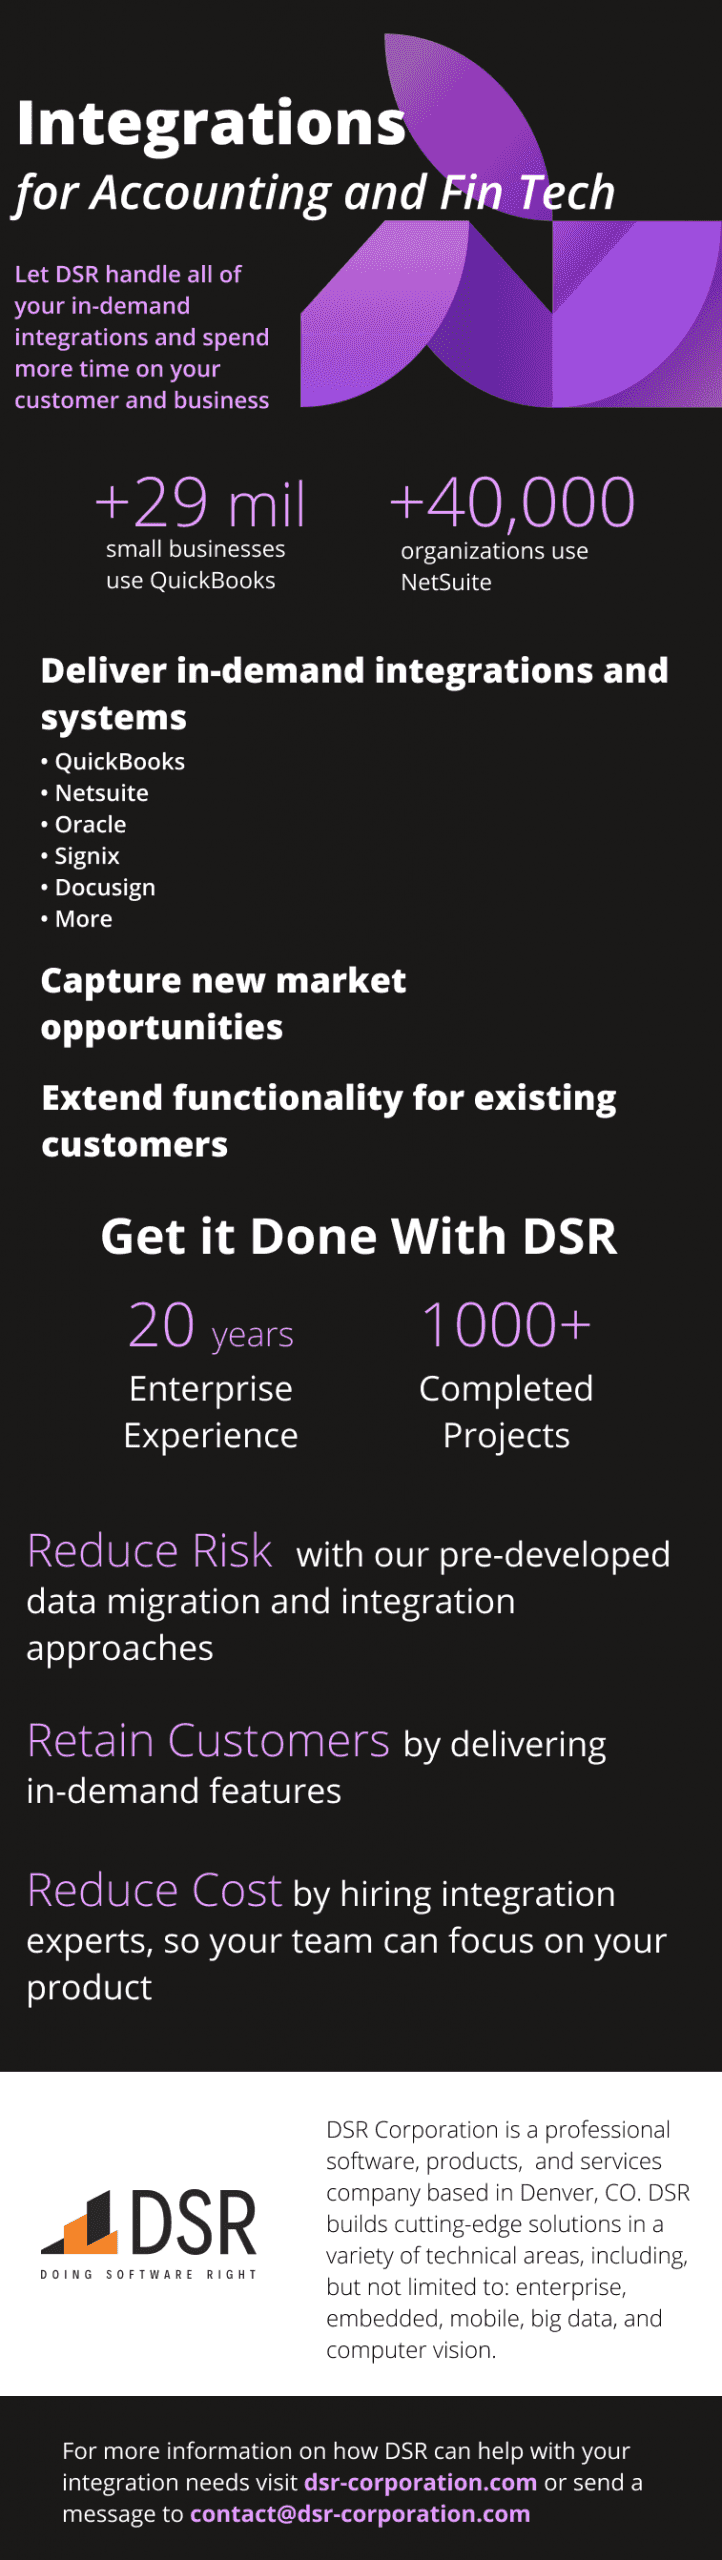 Integrations resources from DSR one-page.